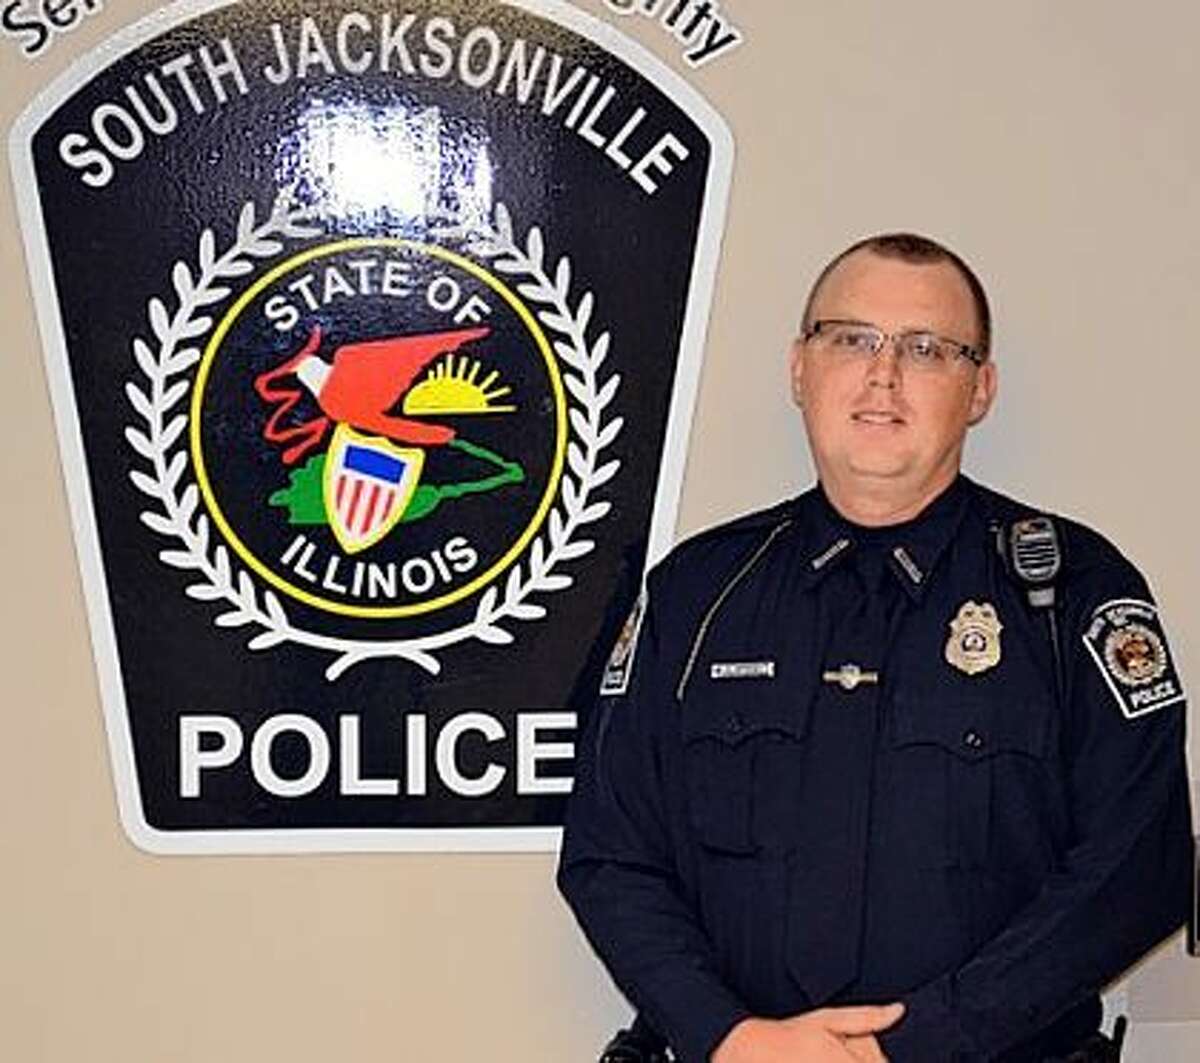 In honor of South Jacksonville Police Officer Scot Fitzgerald, Jacksonville Mayor Andy Ezard has ordered that all flags be lowered to half-staff.